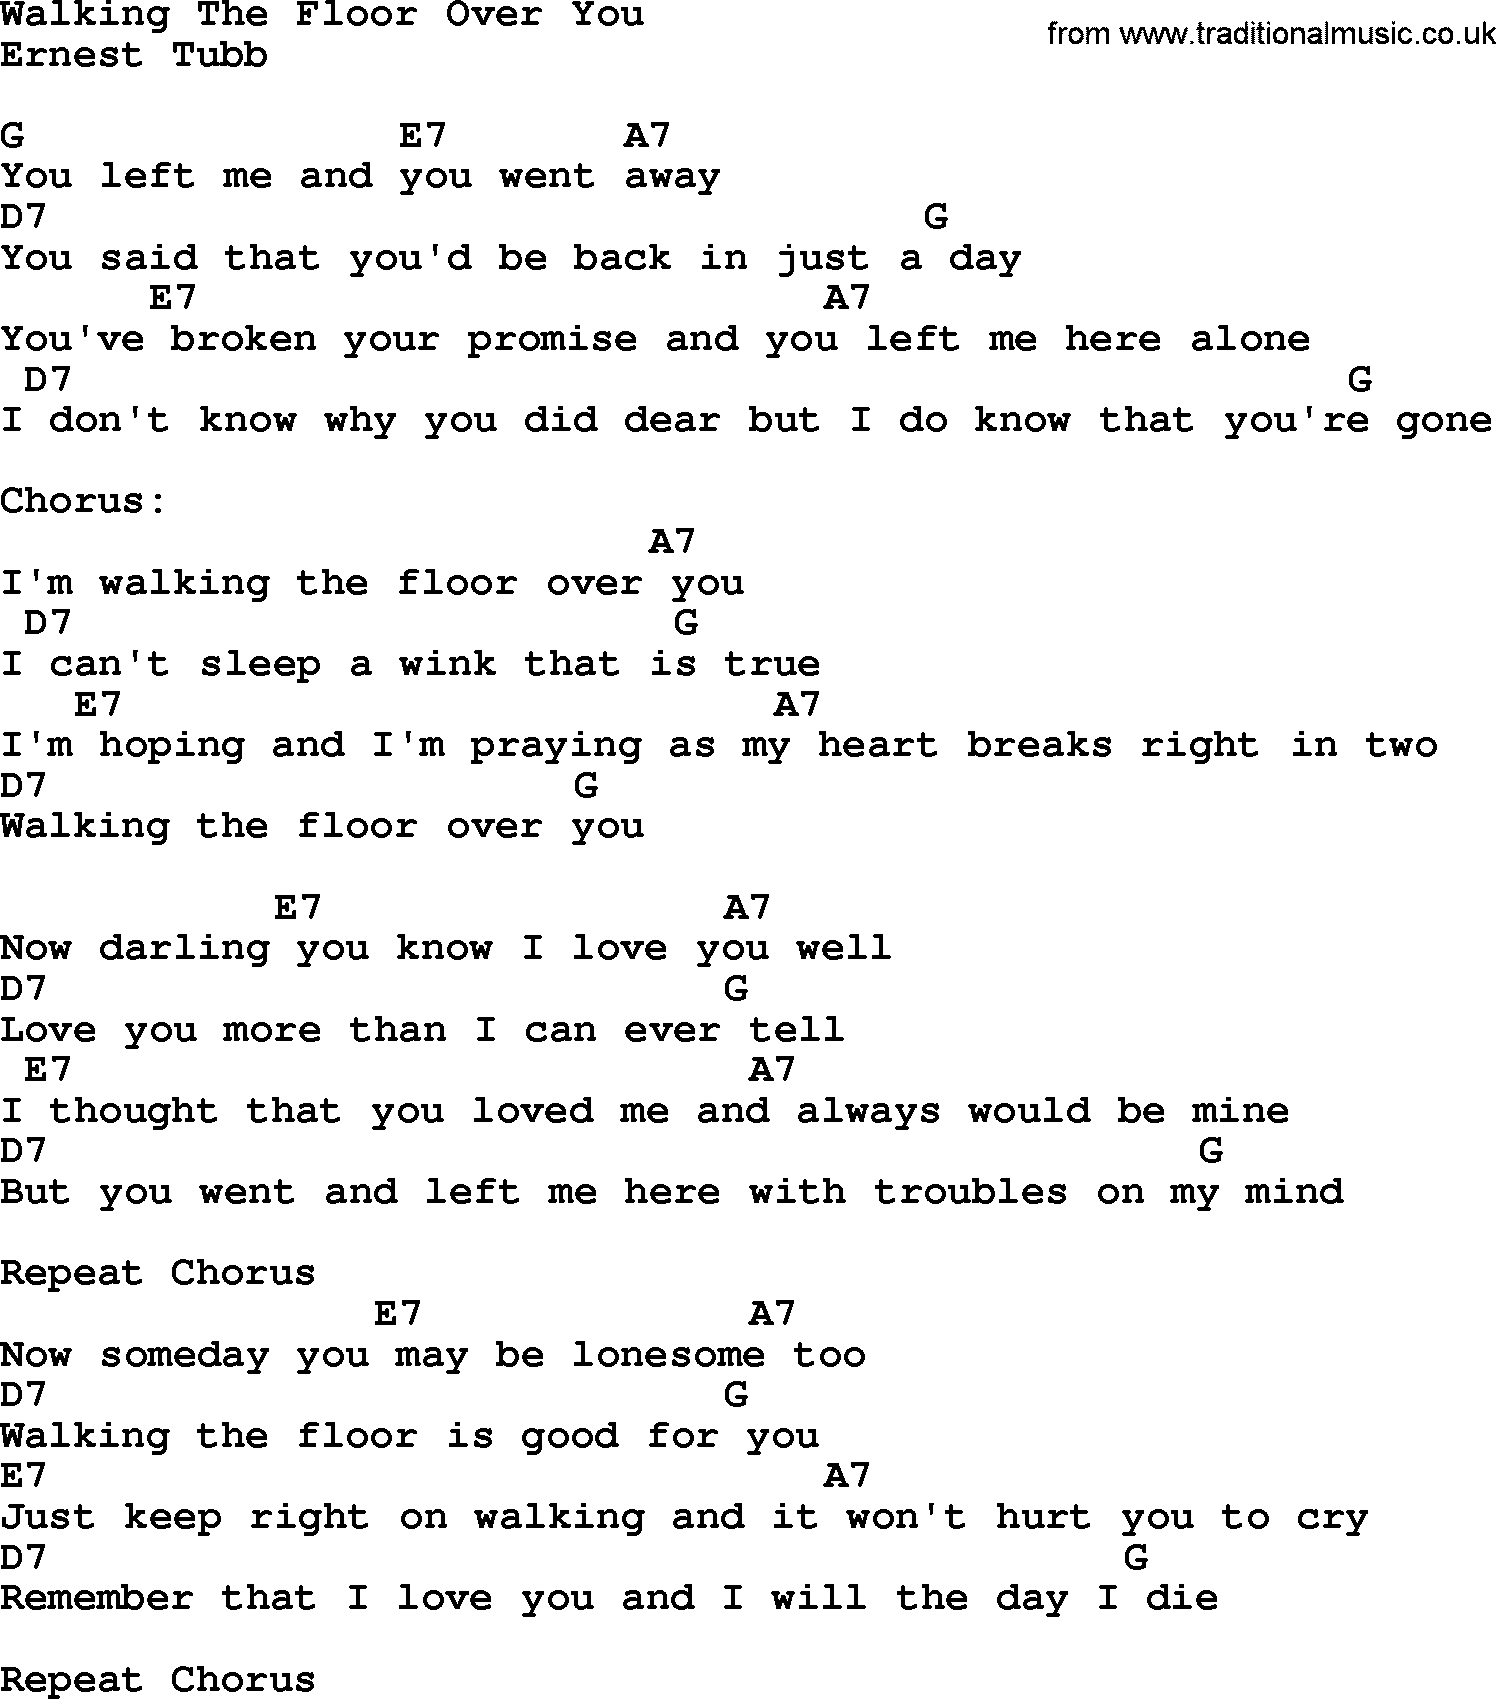 Country music song: Walking The Floor Over You lyrics and chords